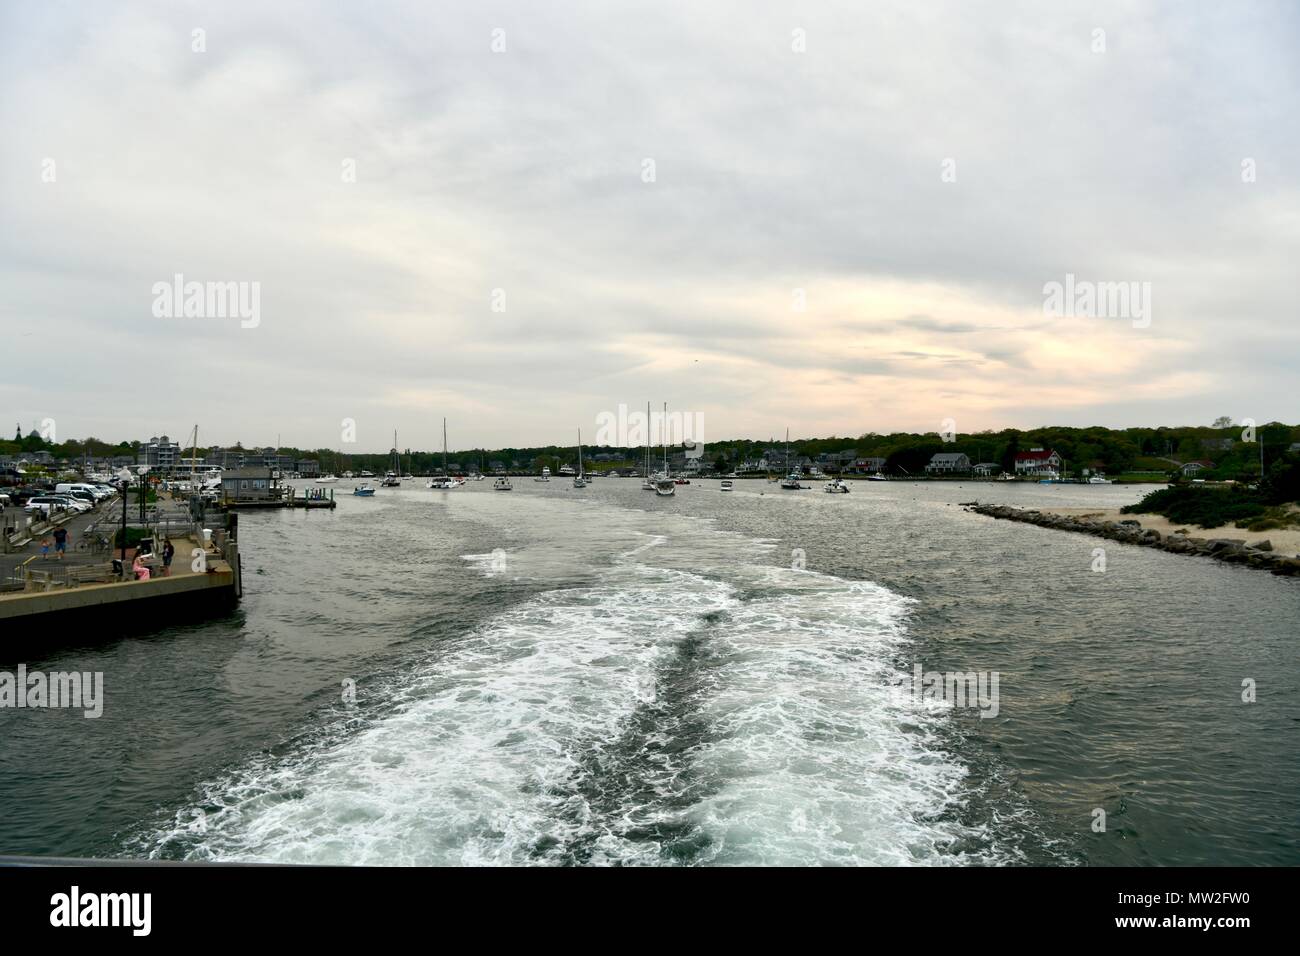 Boat wake from behind a island ferry in the Atlantic Ocean Stock Photo